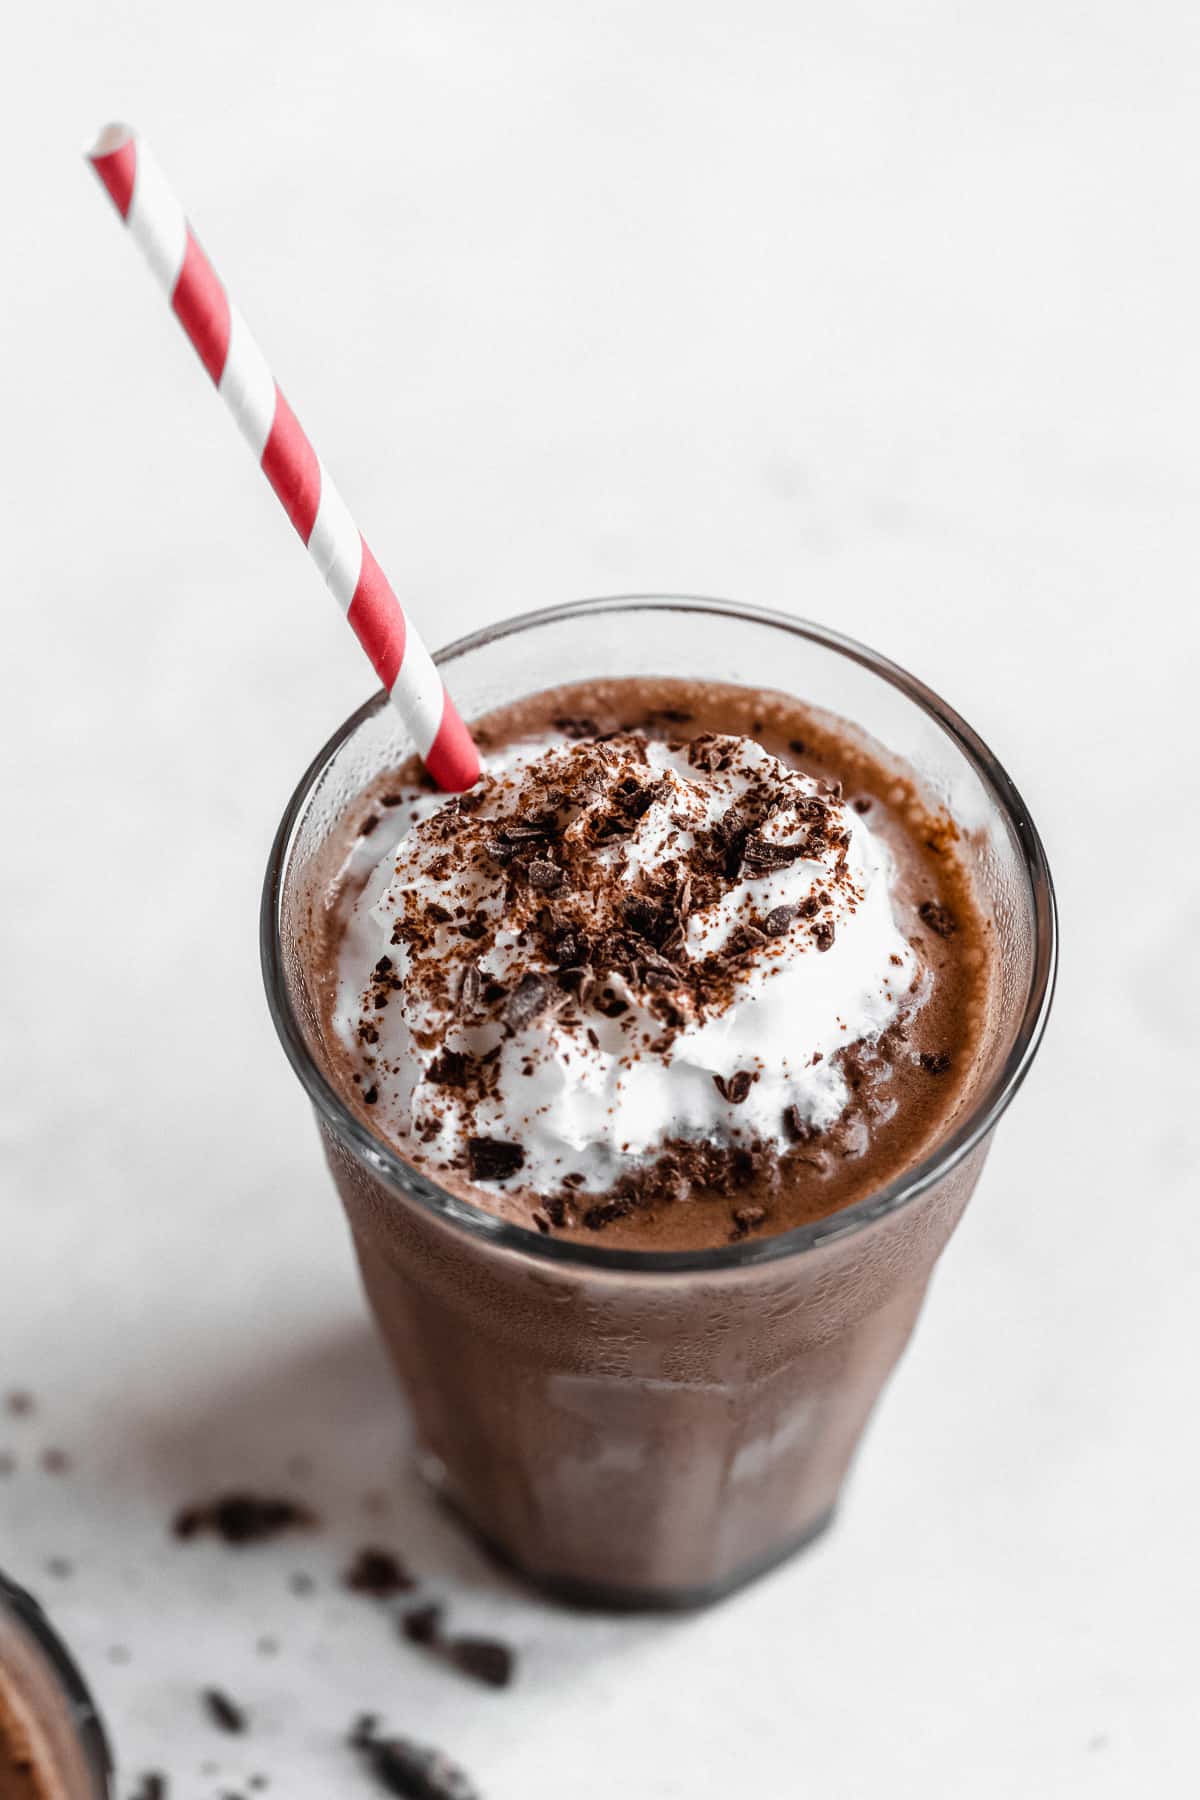 Overhead image of a glass of Frozen Mexican Hot Chocolate  with a red and white striped straw poking out of the glass.  